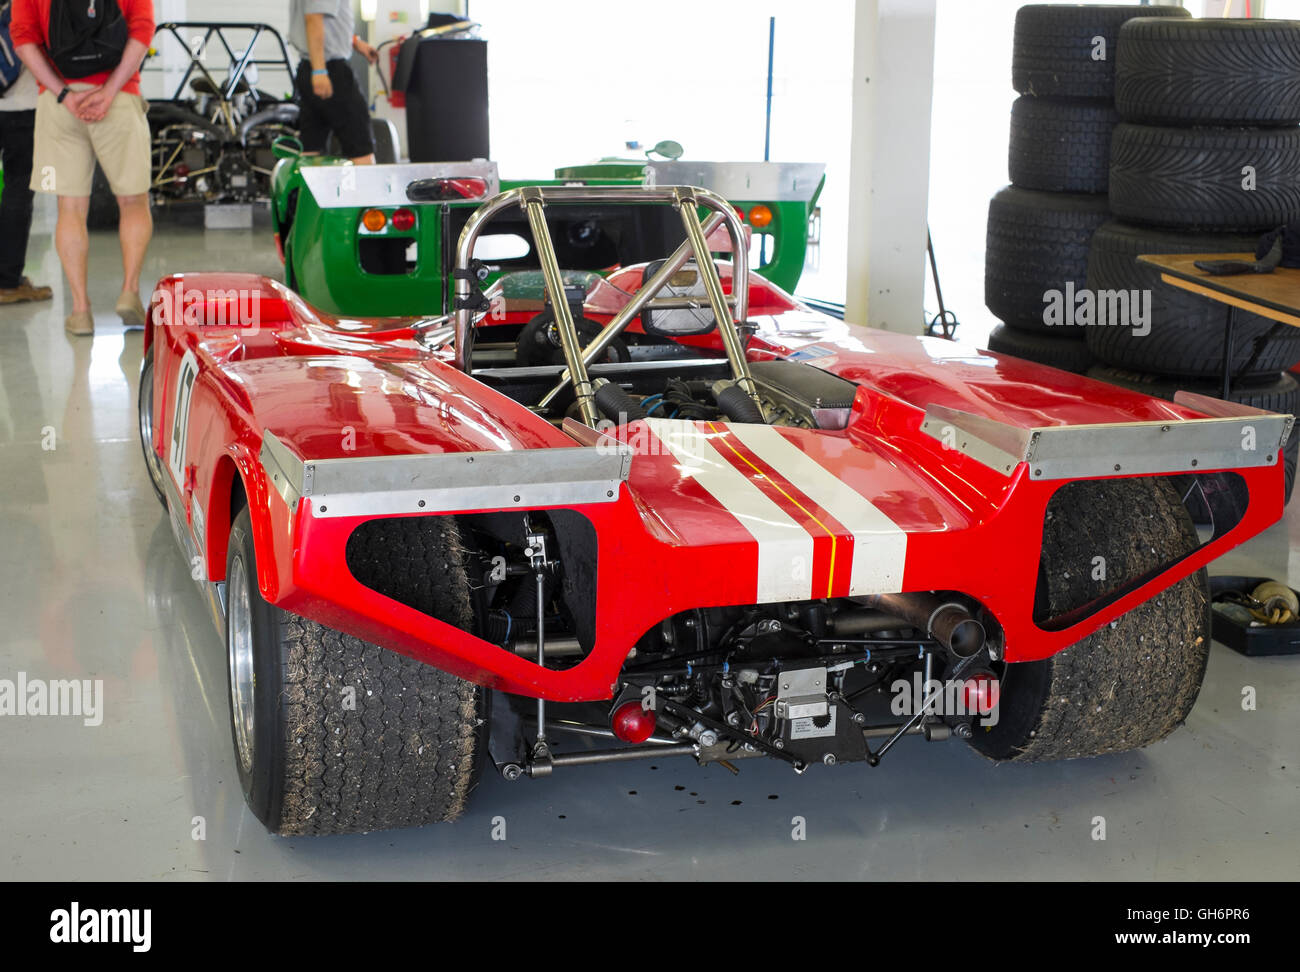 A Lola T10 sports car in the pits at 2016 Silverstone Classic event, England, UK Stock Photo